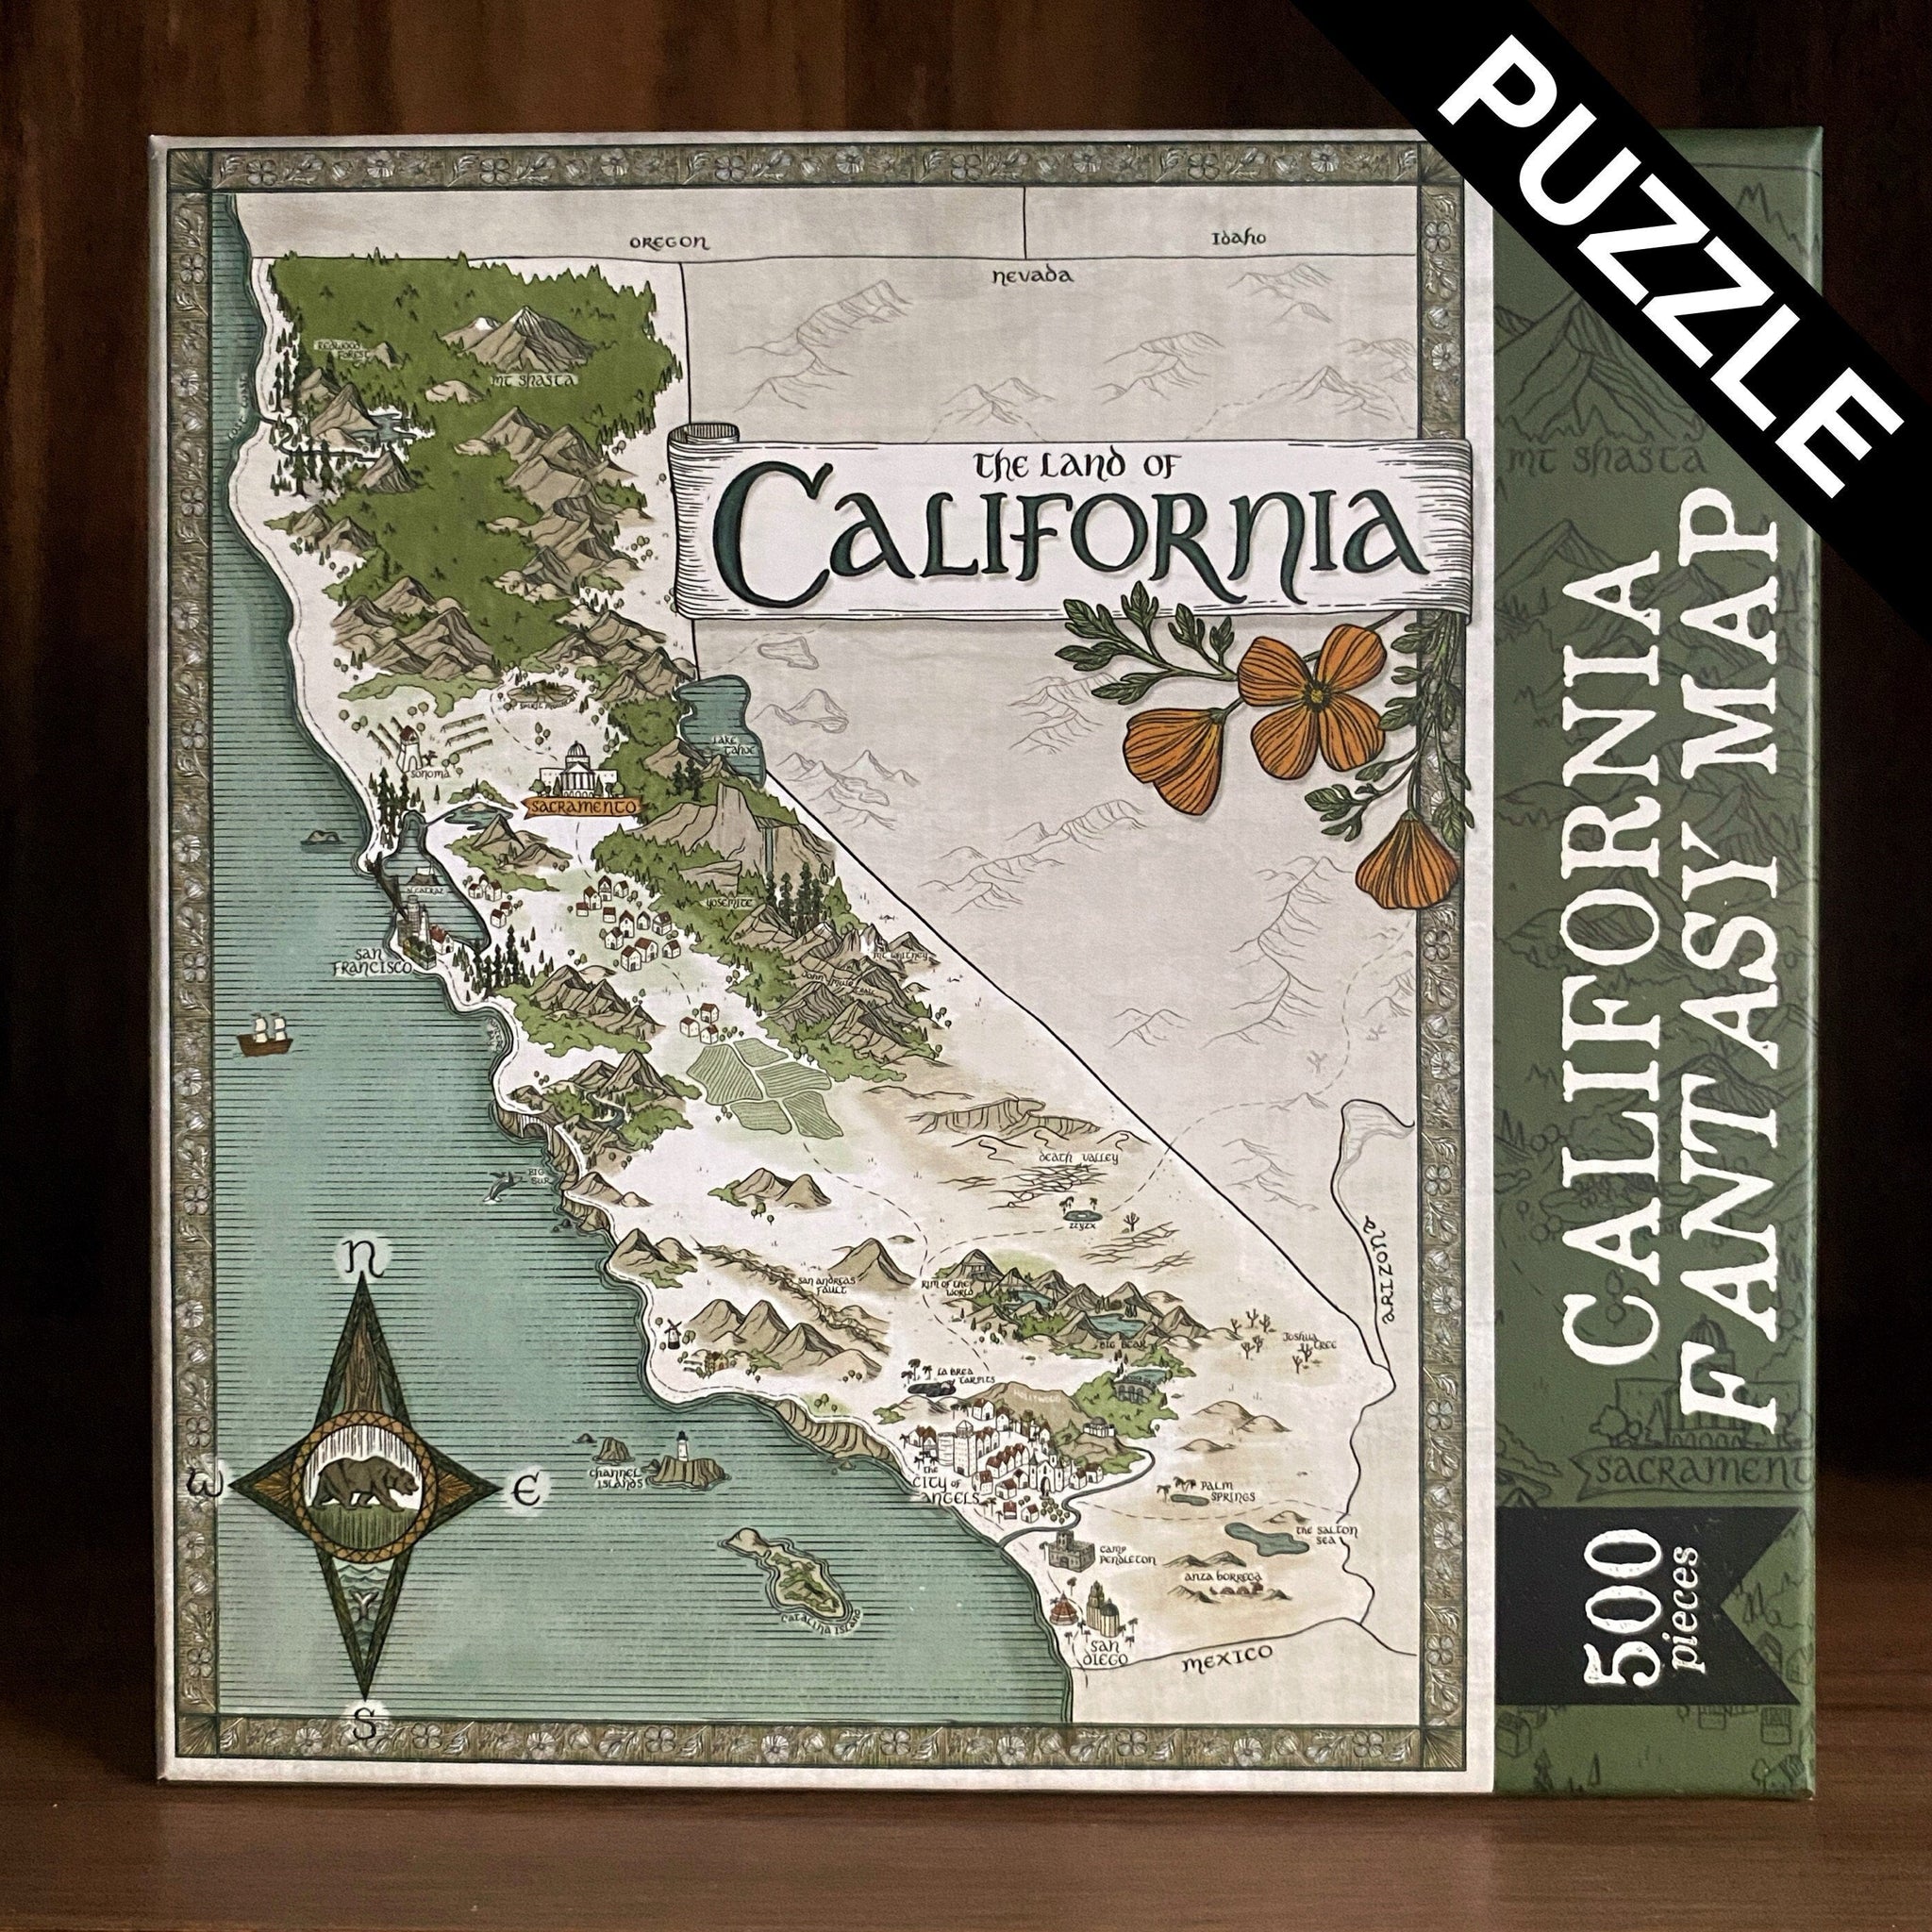 Image shows a 500 piece puzzle with a hand-drawn fantasy-style map of California